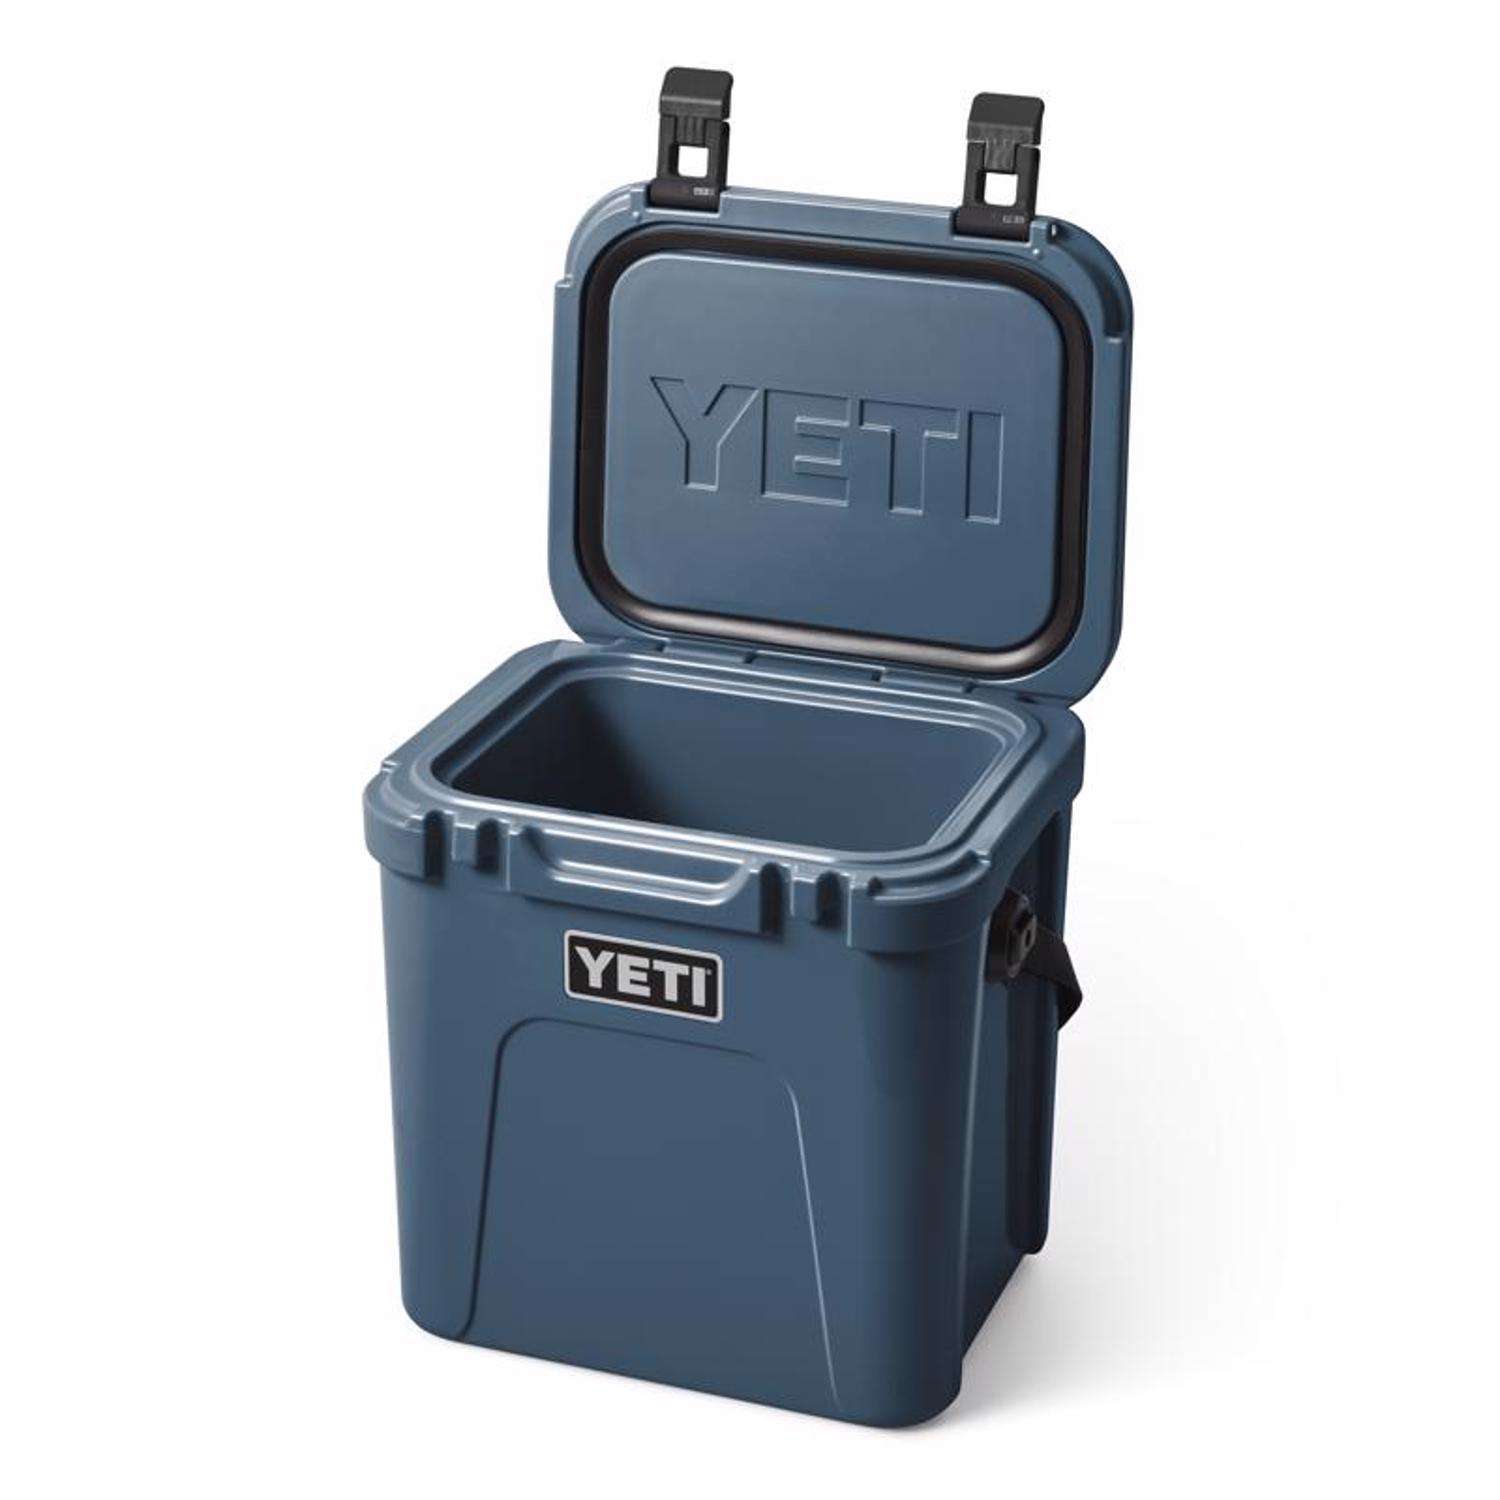 Yeti sale: Take 20% off coolers, tumblers and more in Nordic